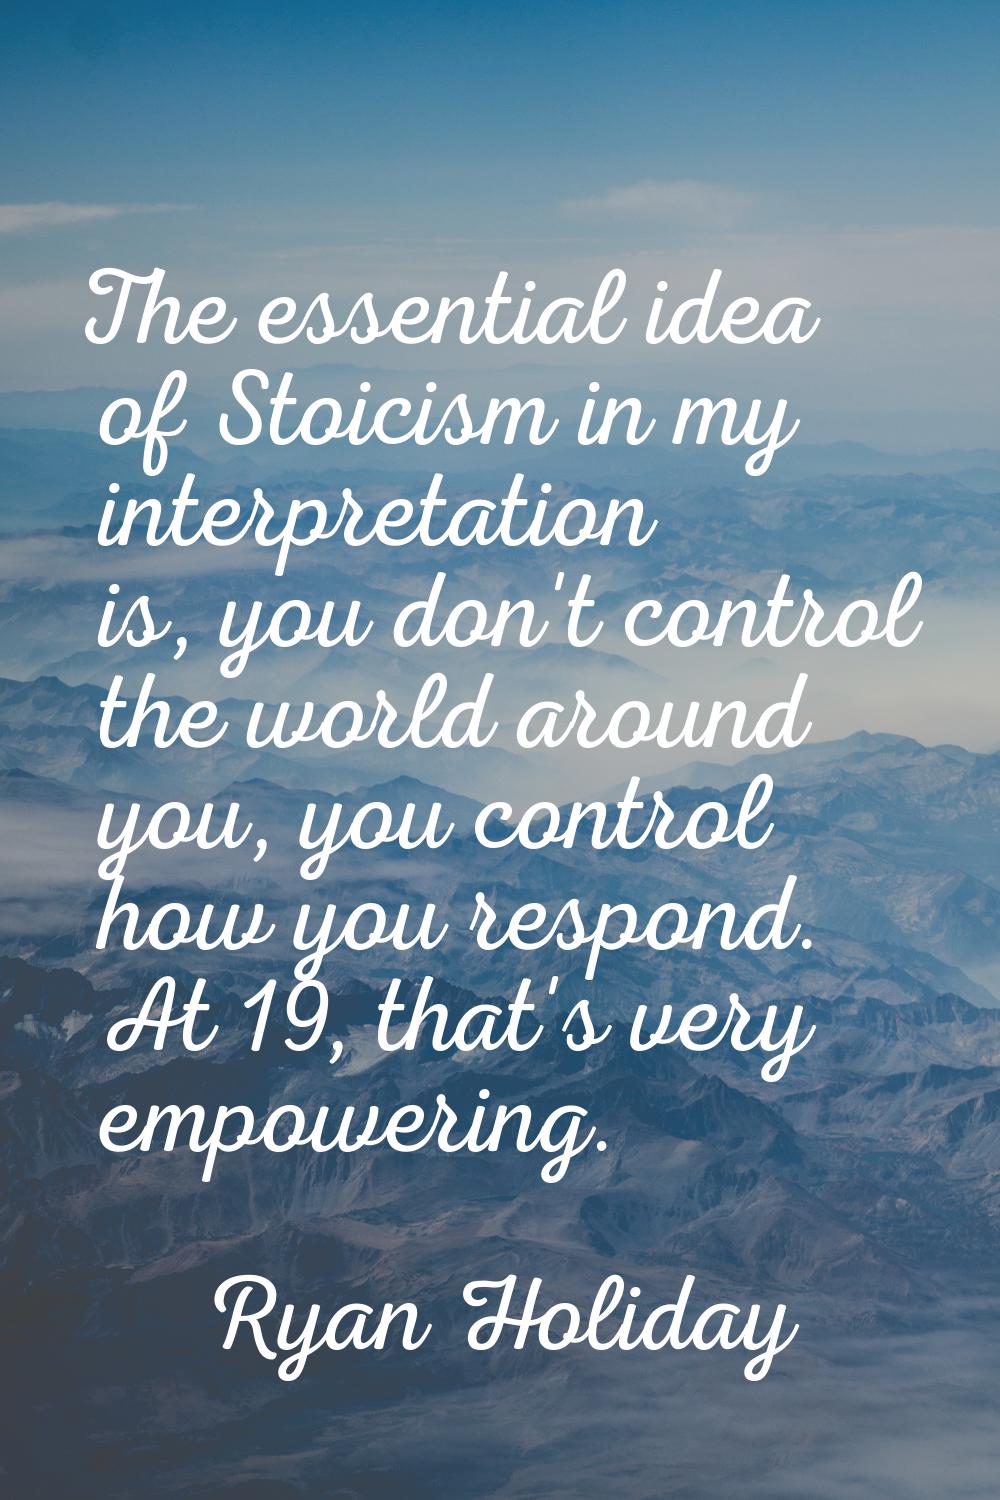 The essential idea of Stoicism in my interpretation is, you don't control the world around you, you